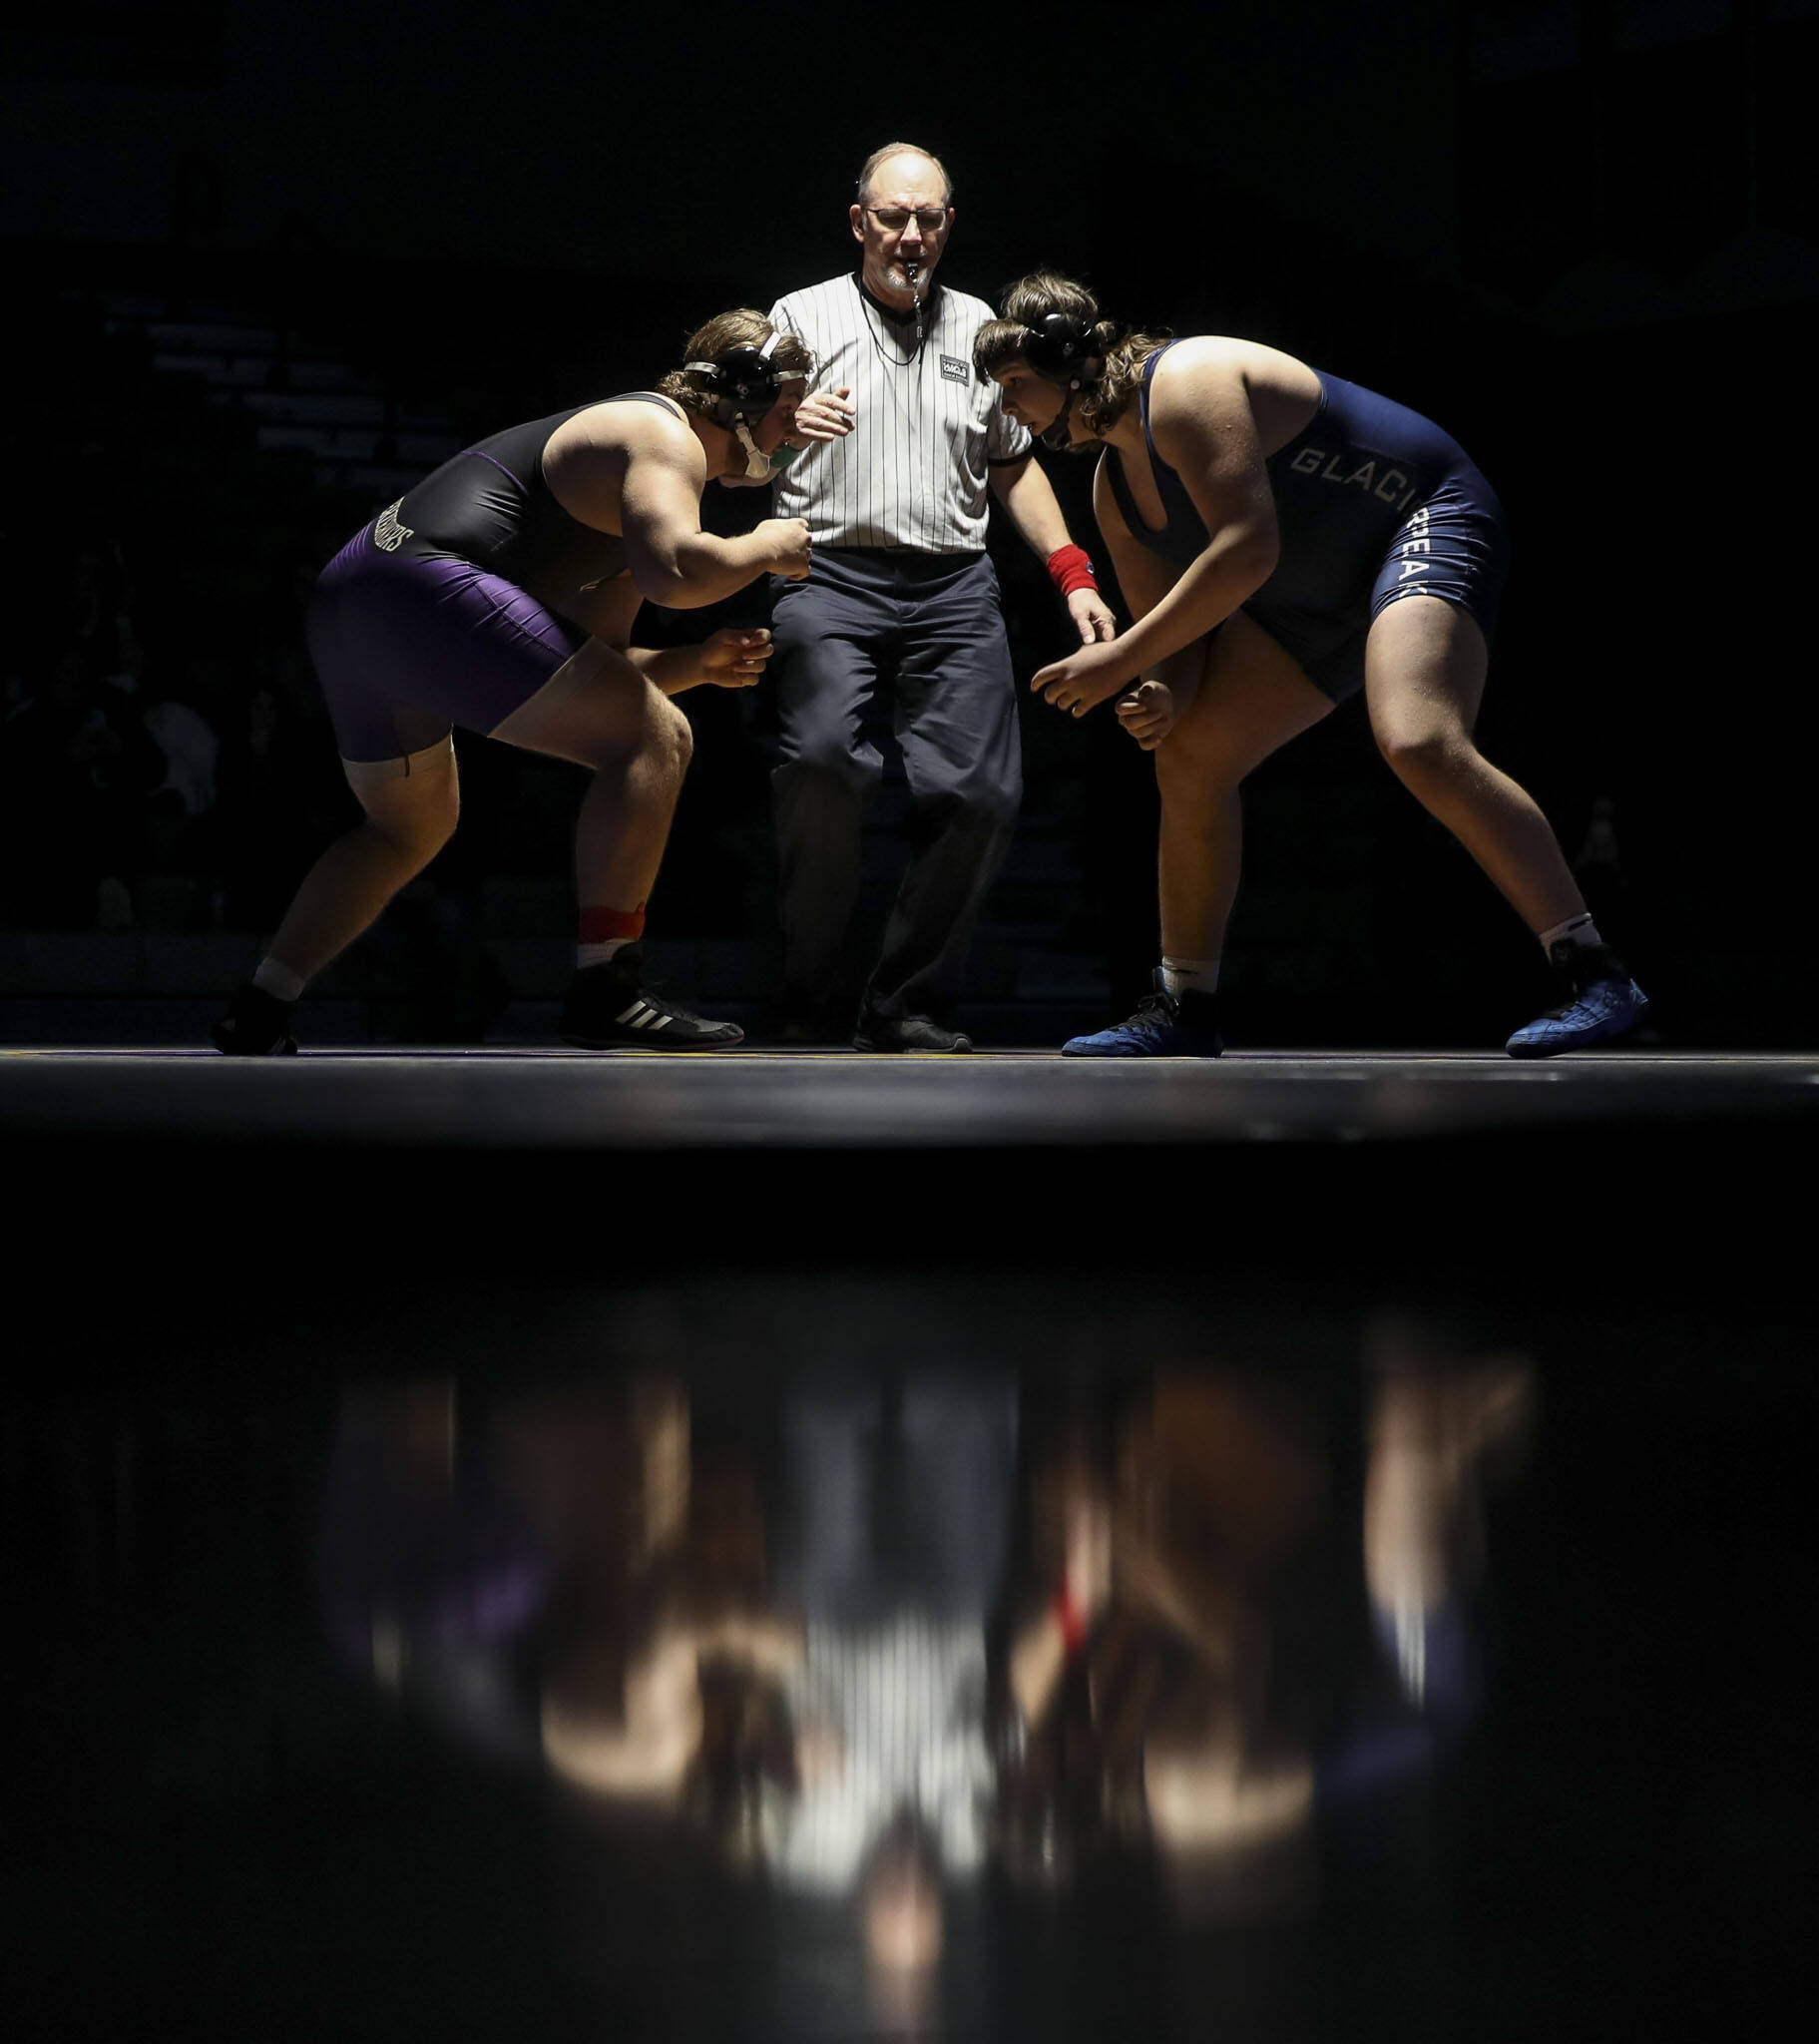 Lake Stevens tops GP, claims another Wesco 4A wrestling title